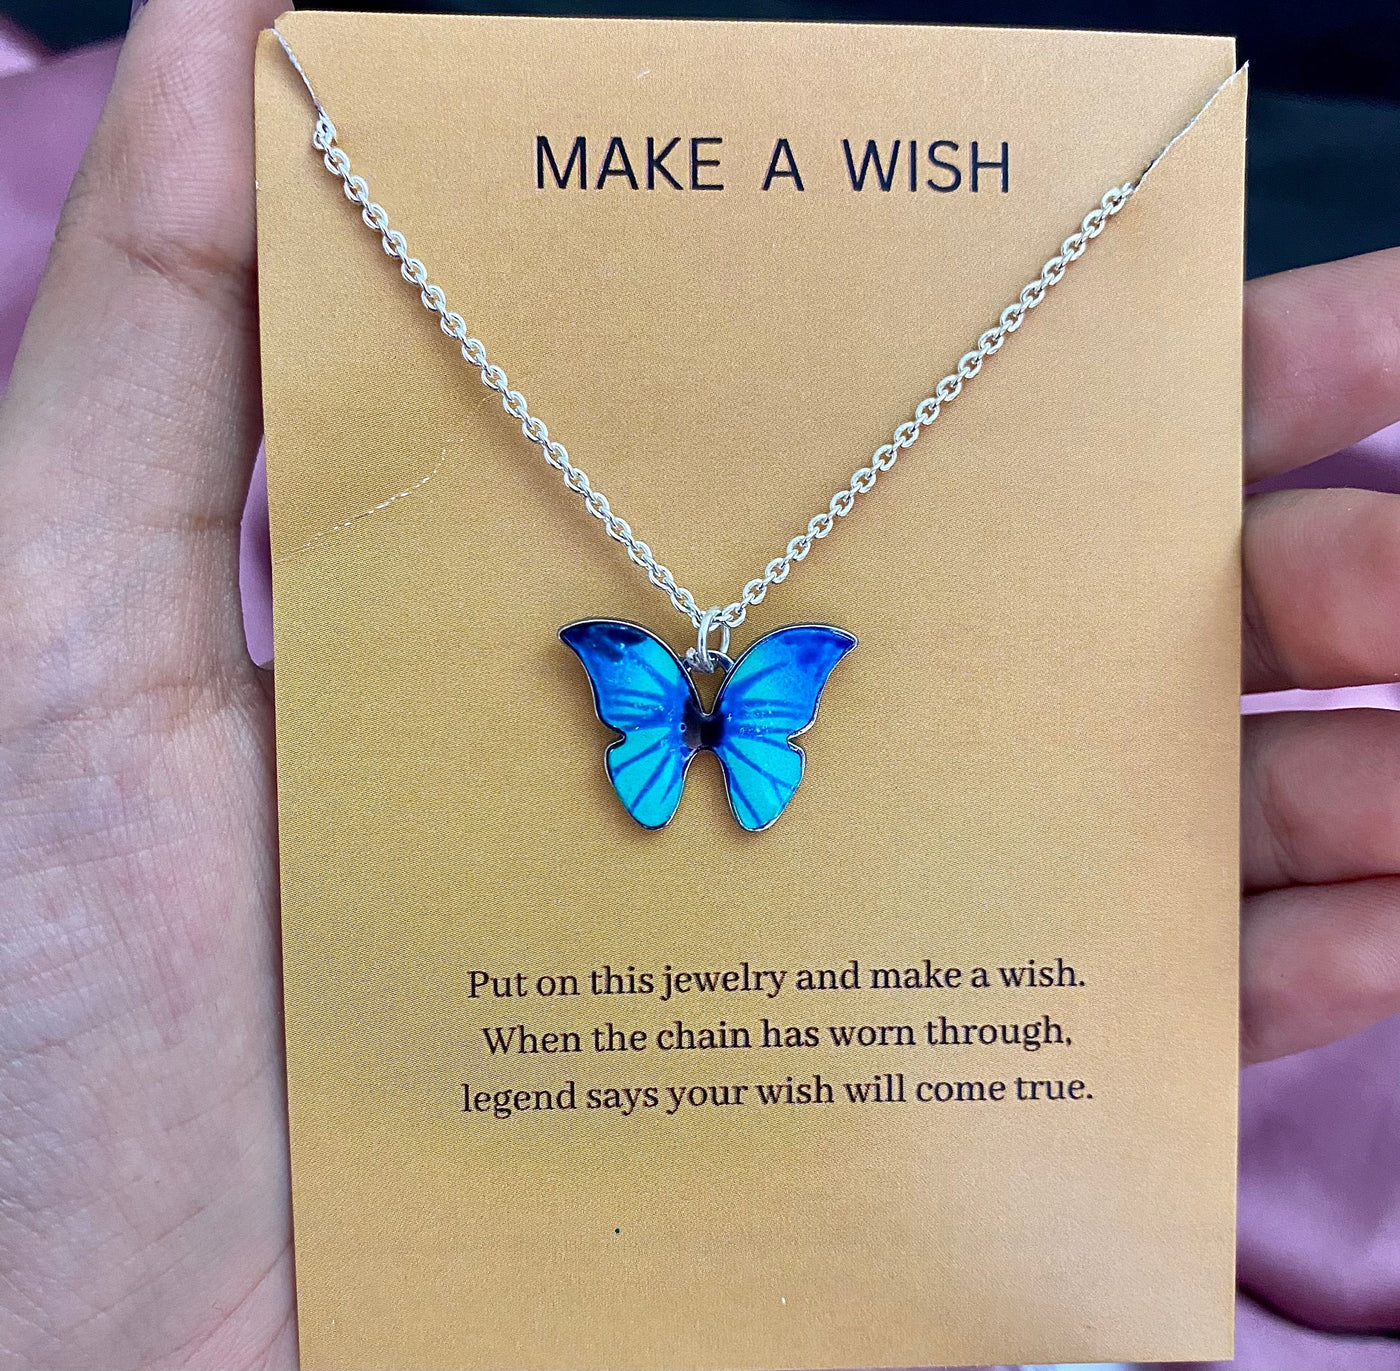 Waterproof Blue Butterfly Charm Necklace With Stainless Steel Chain